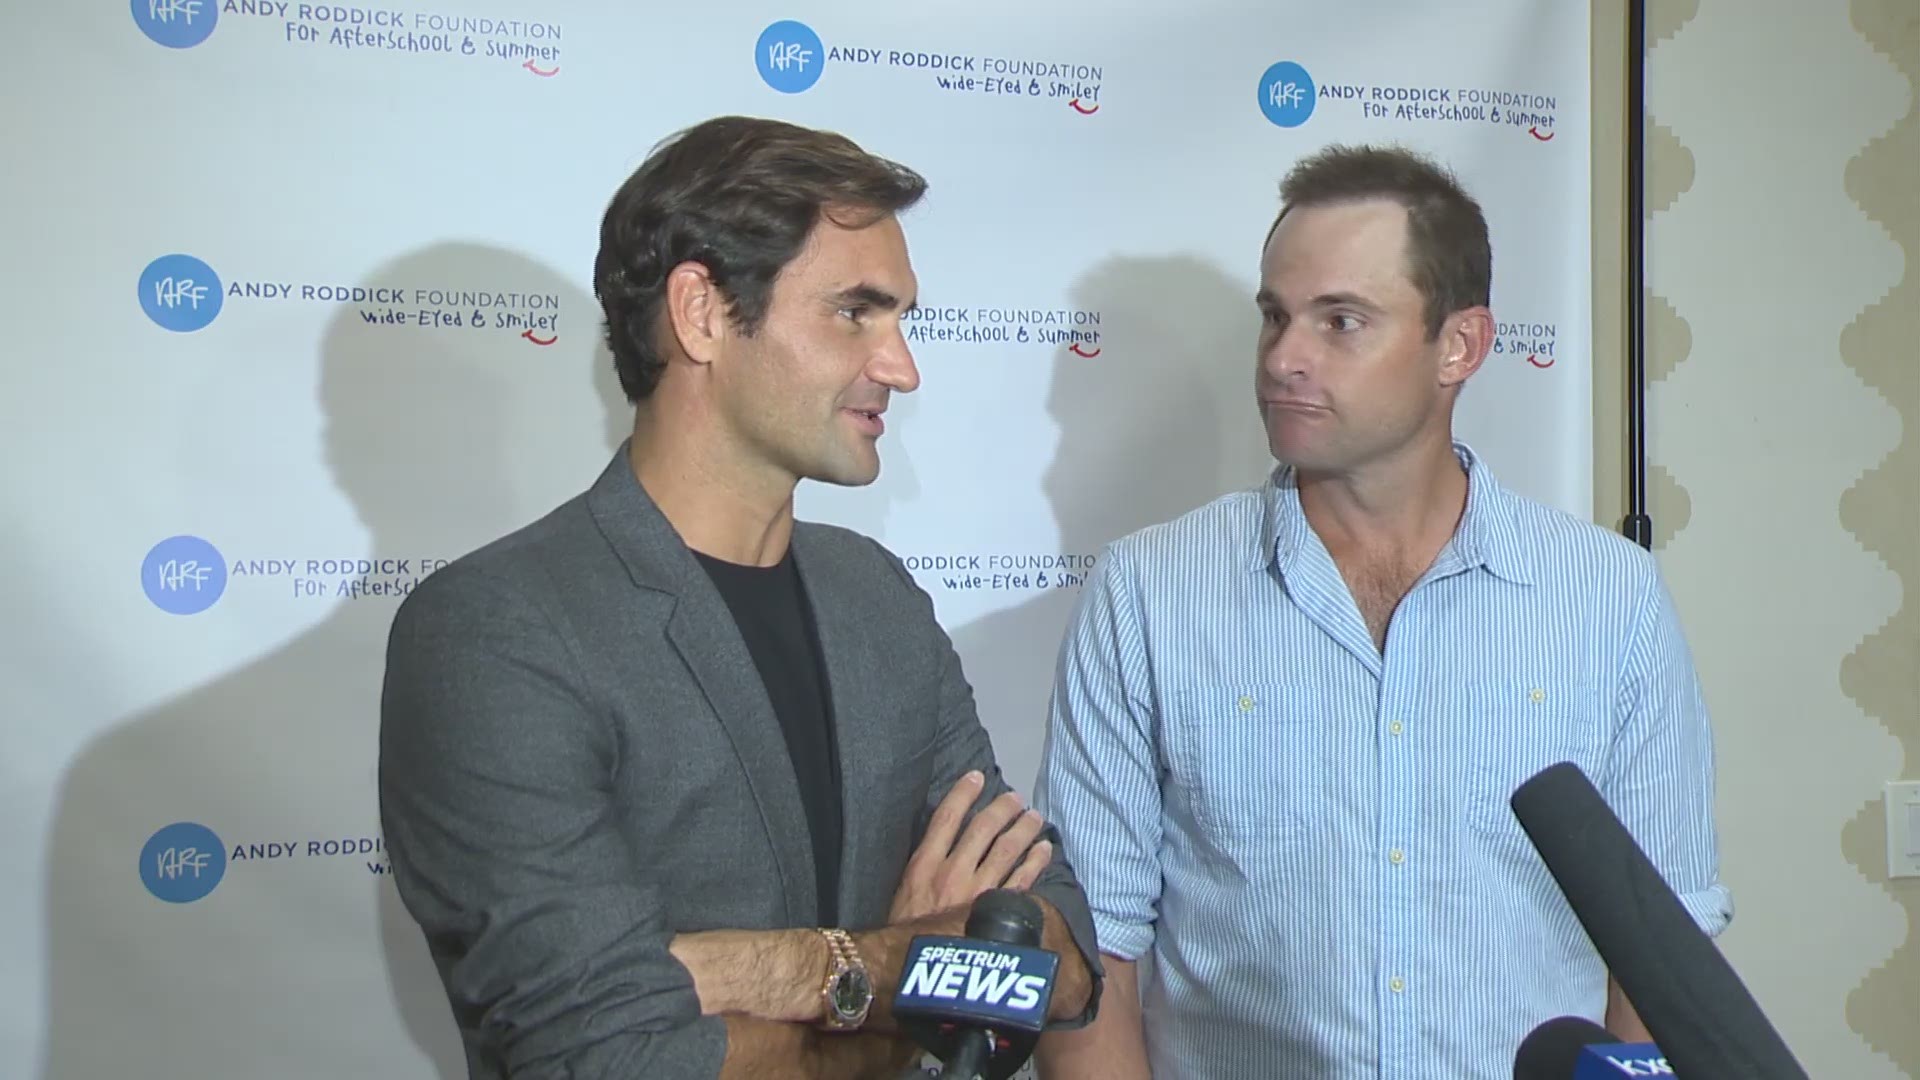 Roger Federer makes a stop in Austin for an event supporting the Andy Roddick Foundation.